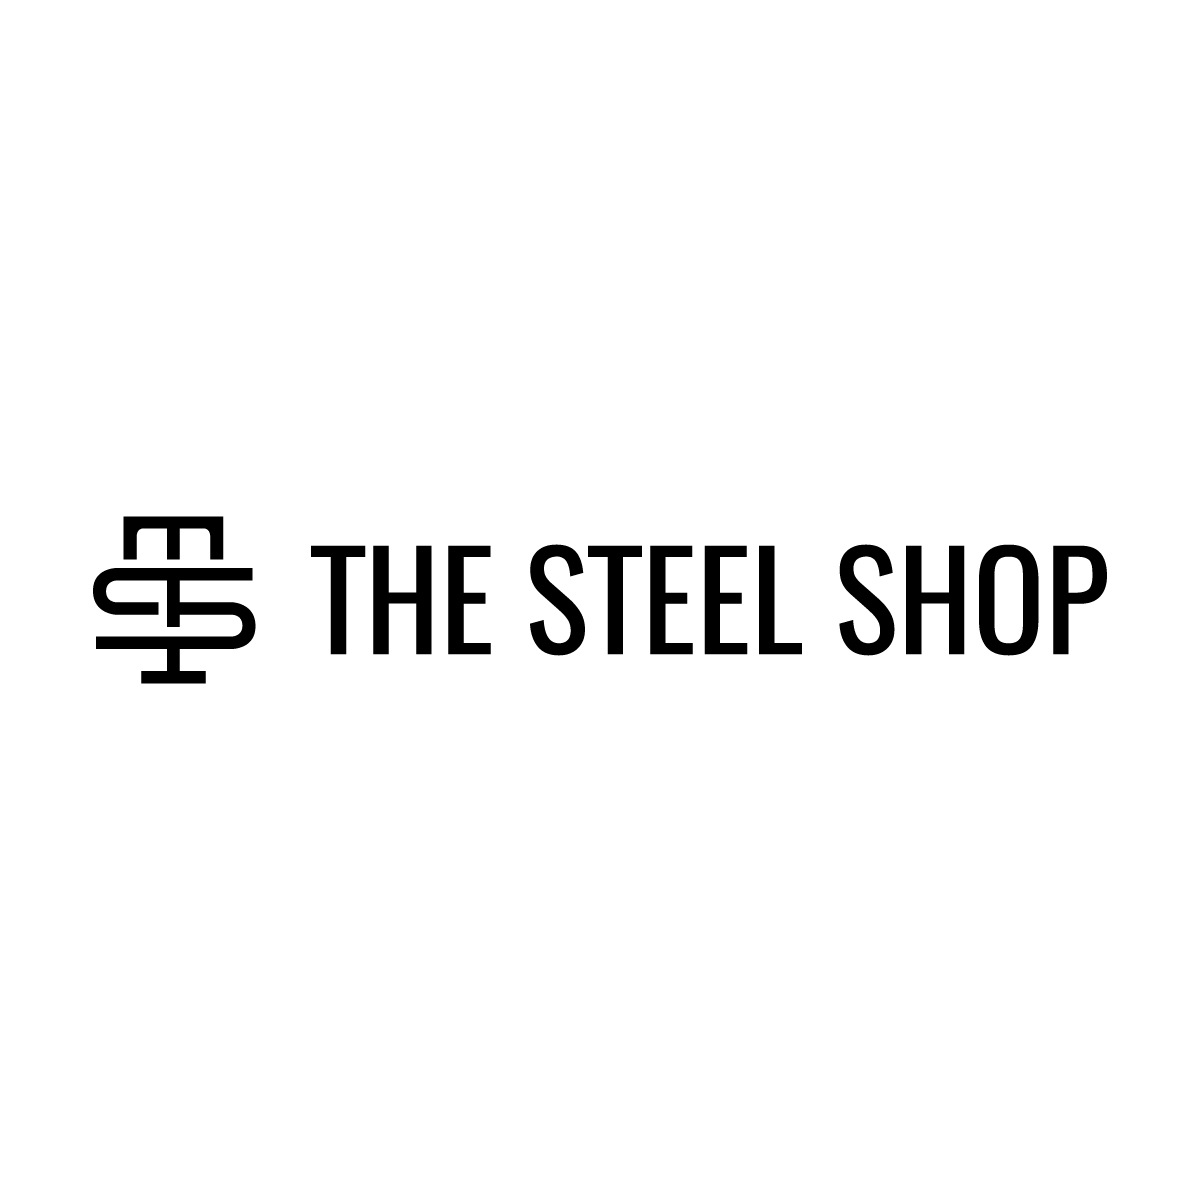 The Steel shop review